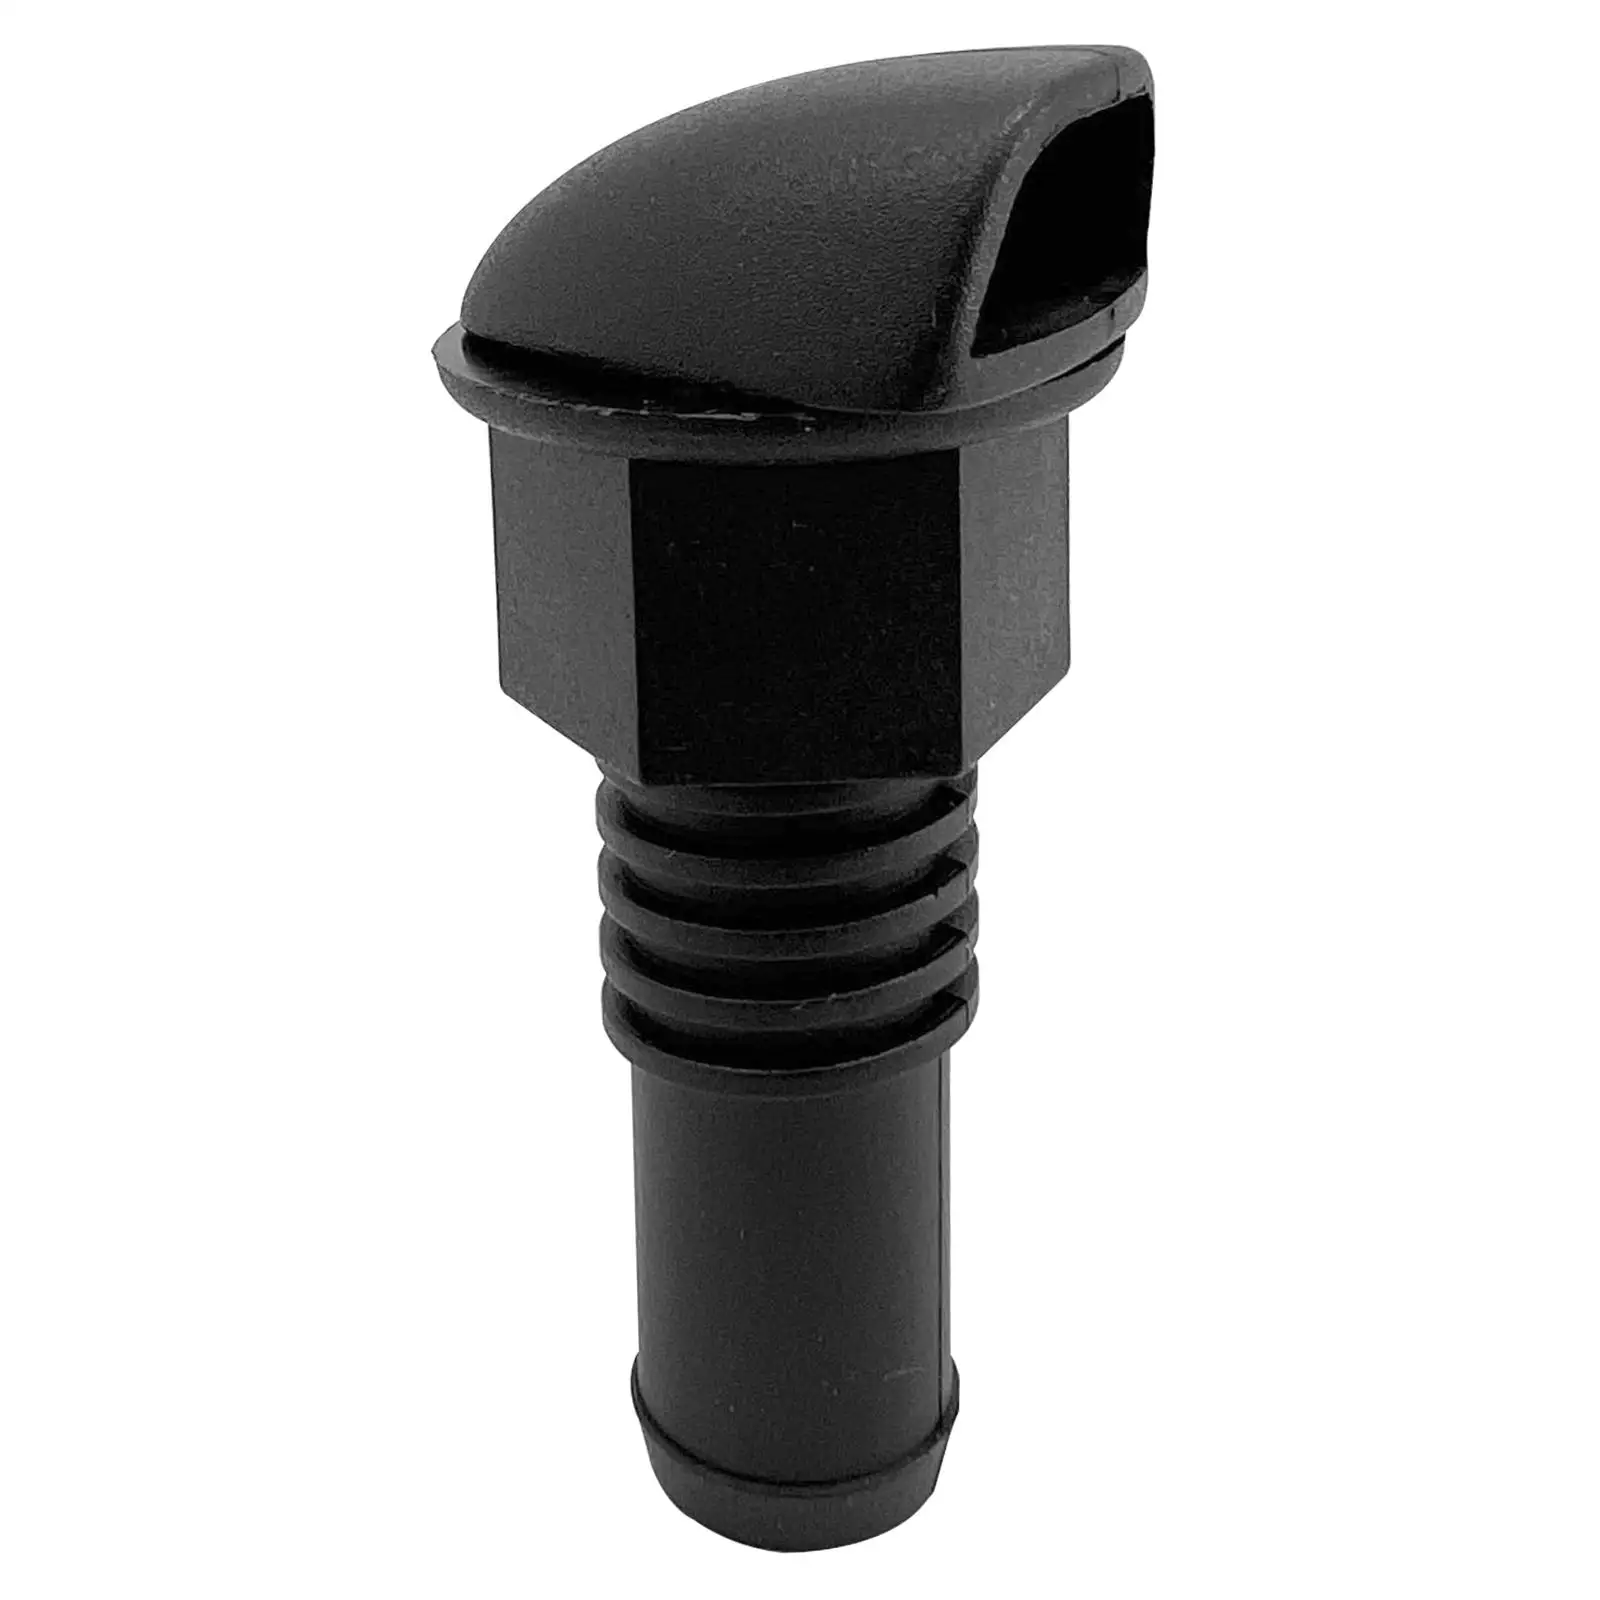 Marine Boat Fuel Gas Tank Vent Marine Tank Vent Nylon Fitting Flush Mount Replacement Boat Fuel Vent Repair Parts for 5/8